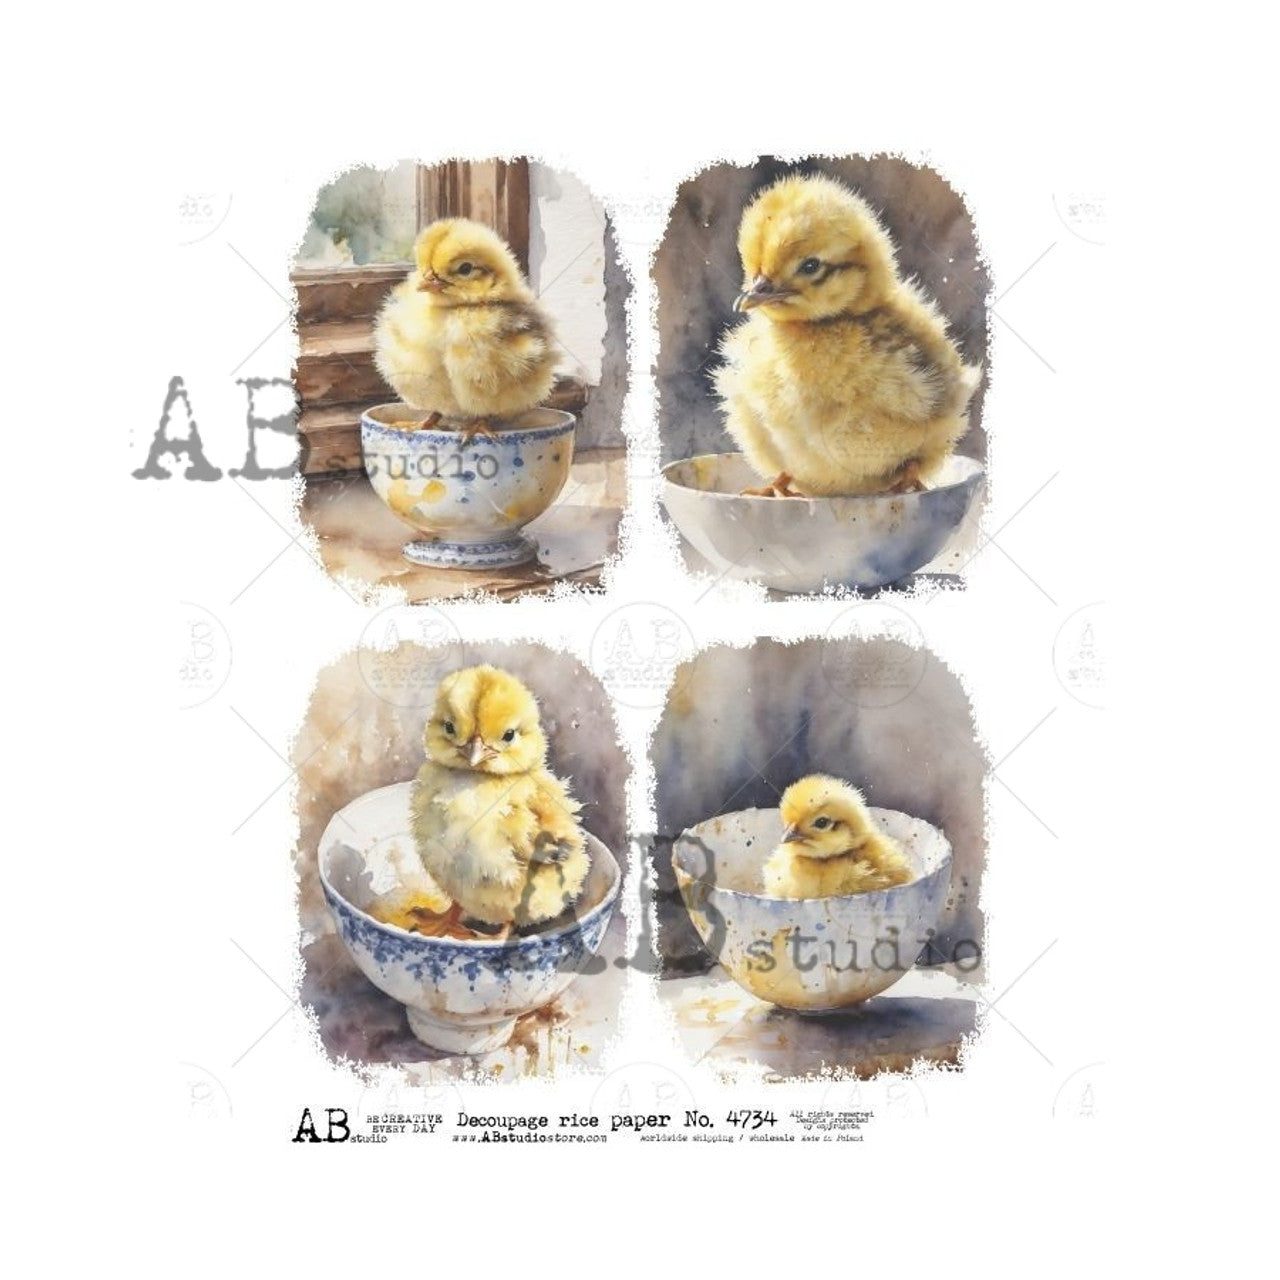 Chicks in a Teacup Four Pack (#4734) Rice Paper- AB Studios  Decoupage Queen